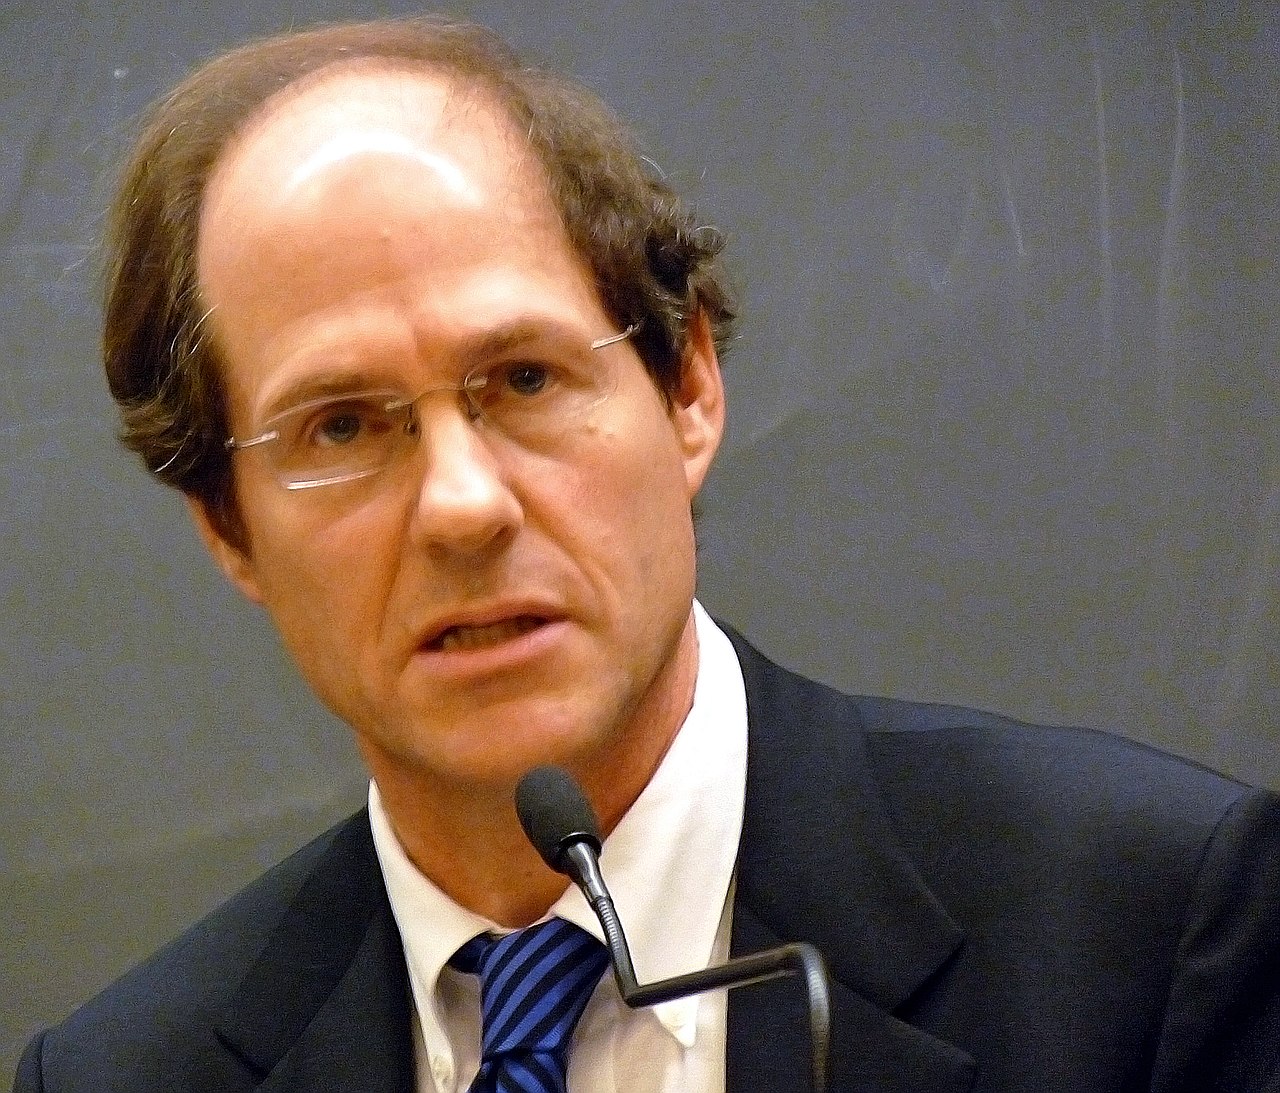 Progressives Vehemently Object To Cass Sunstein’s Plans To Return To Government